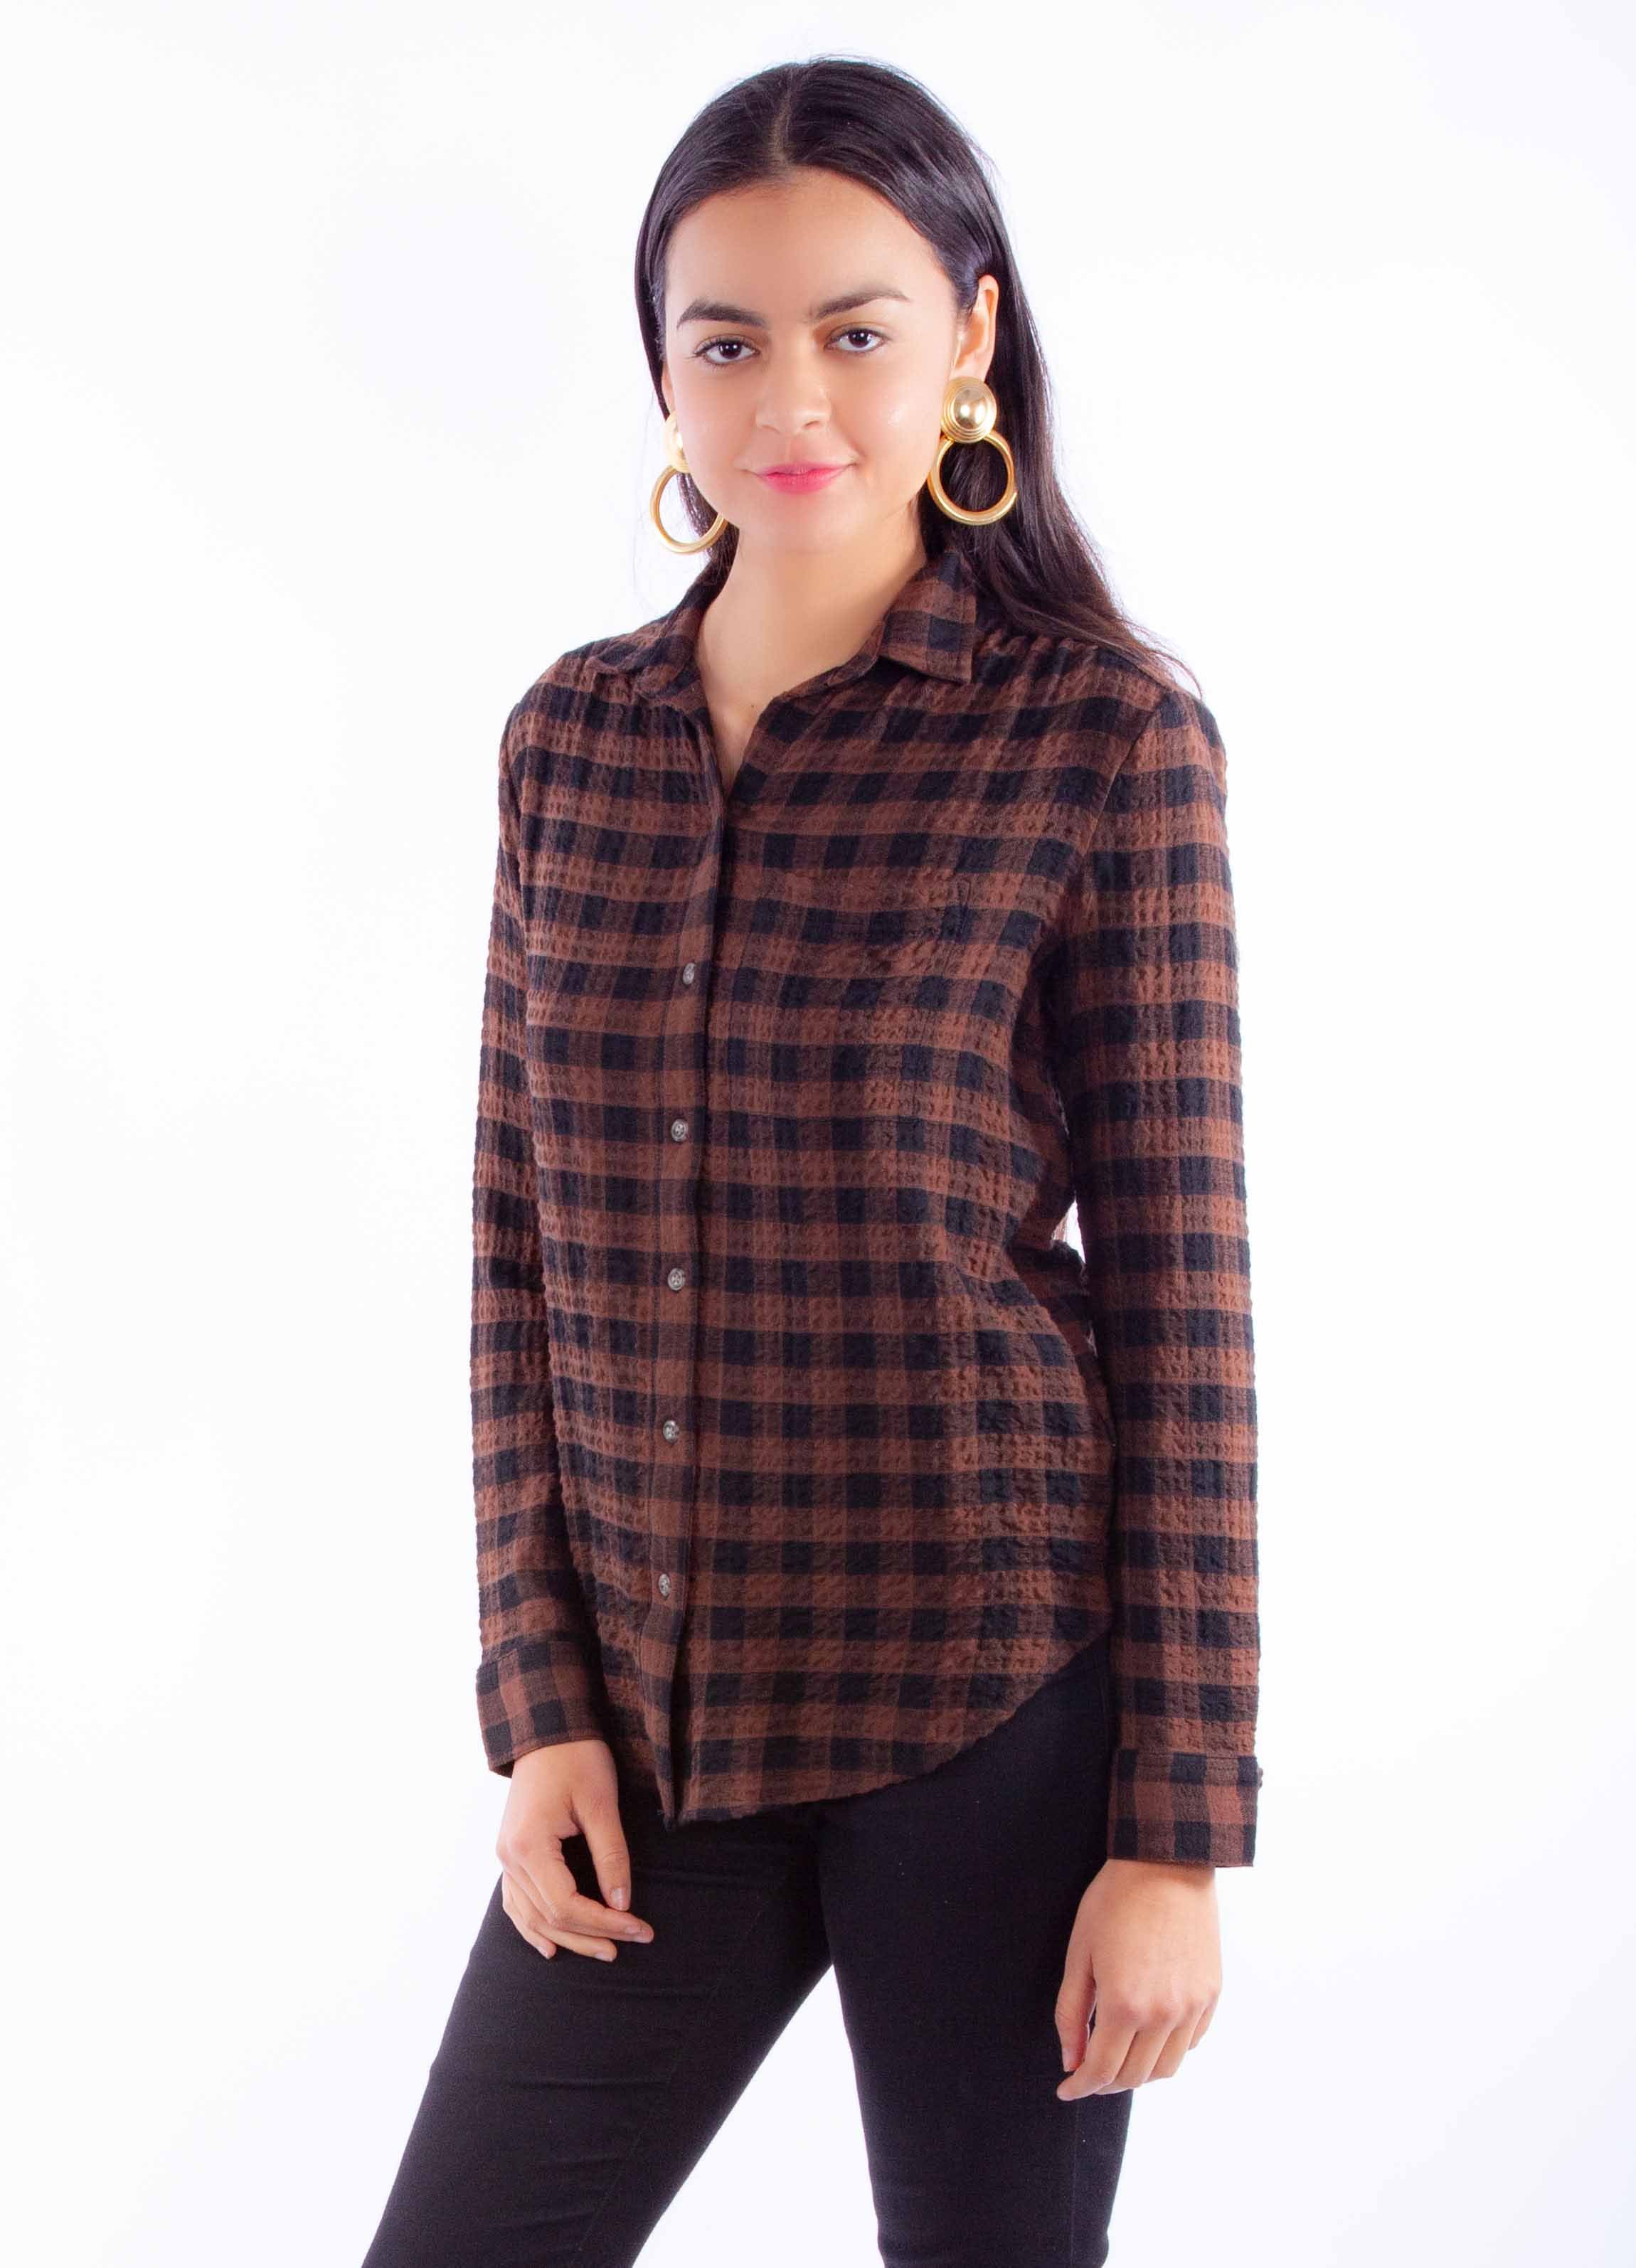 Scully Leather Honey Creek Ladies Plaid Button Up Top